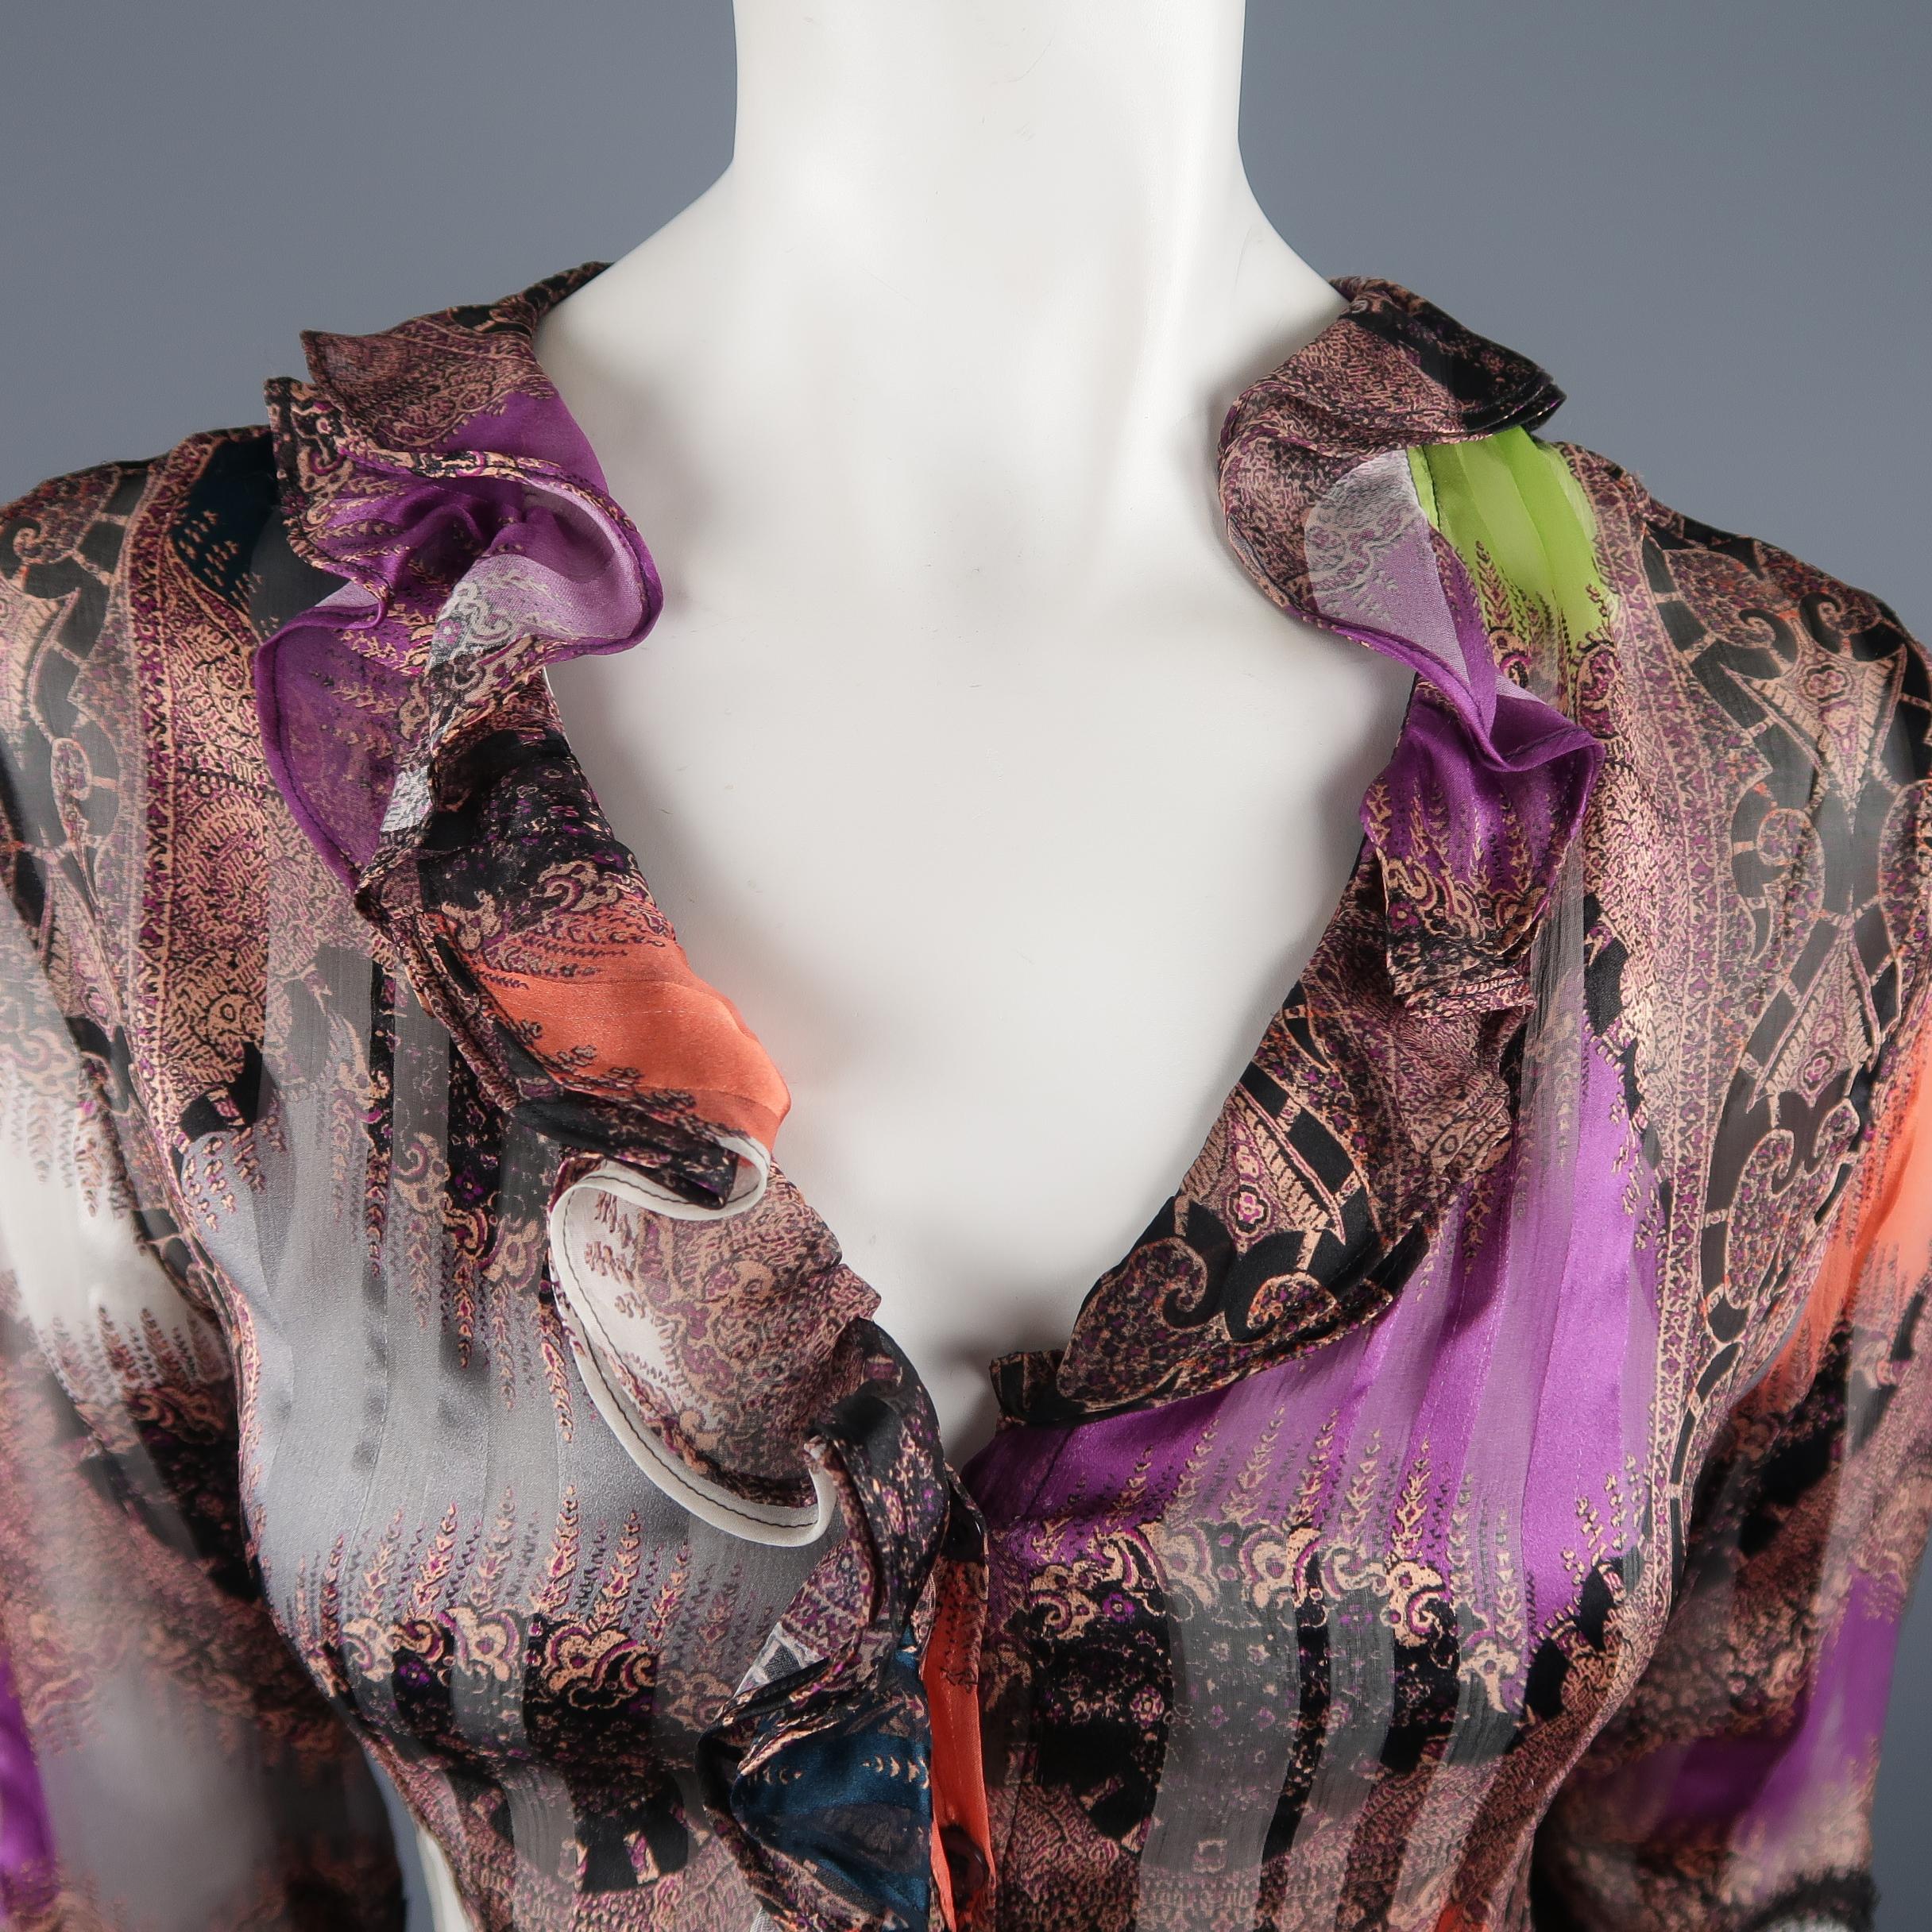 Etro blouse comes in silk opaque stripe textured chiffon with an overall abstract paisley print ruffled collar, ruffled cuffs, and black lace sleeve panels. Made in Italy.
 
Excellent Pre-Owned Condition.
Marked: IT 46
 
Measurements:
 
Shoulder: 15